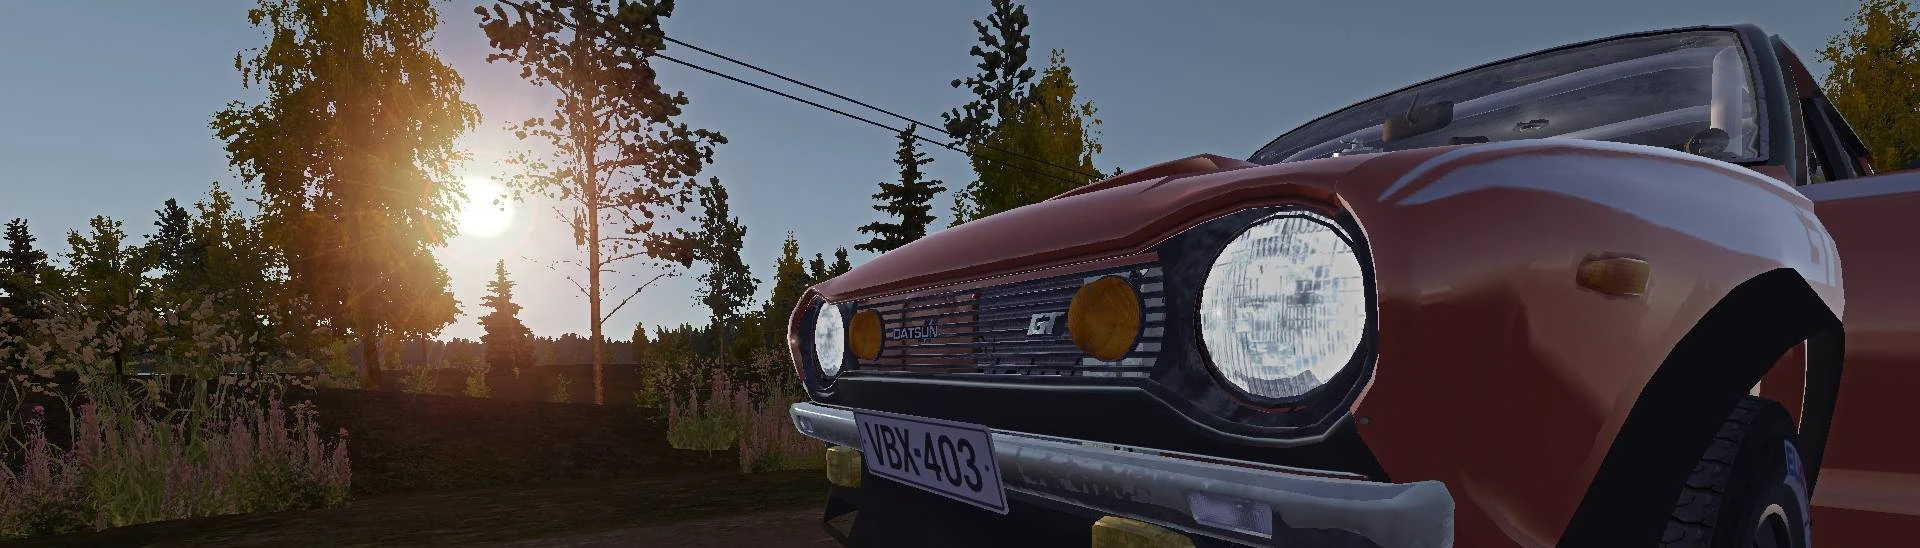 My terrible savegame 2 at My Summer Car Nexus - Mods and community